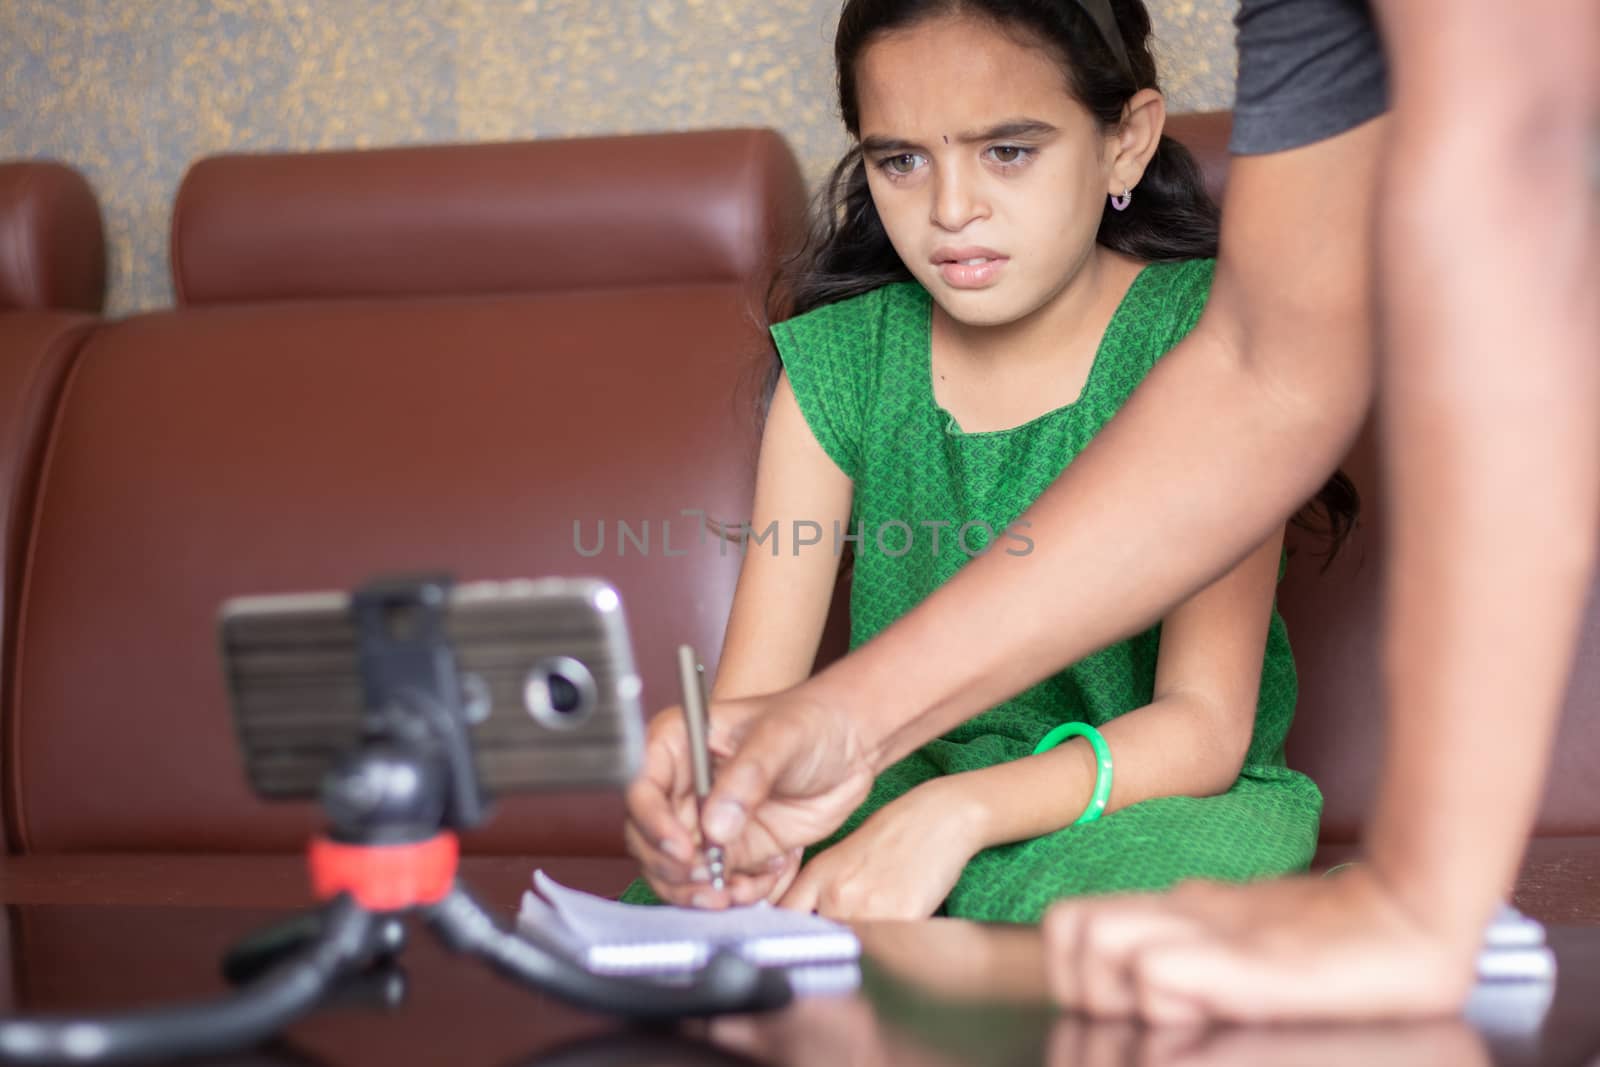 Father helping daughter by solving problem while studying the lesson from online class or e-learning - concept of Role of parents in supporting child during homeschooling, distance learning. by lakshmiprasad.maski@gmai.com